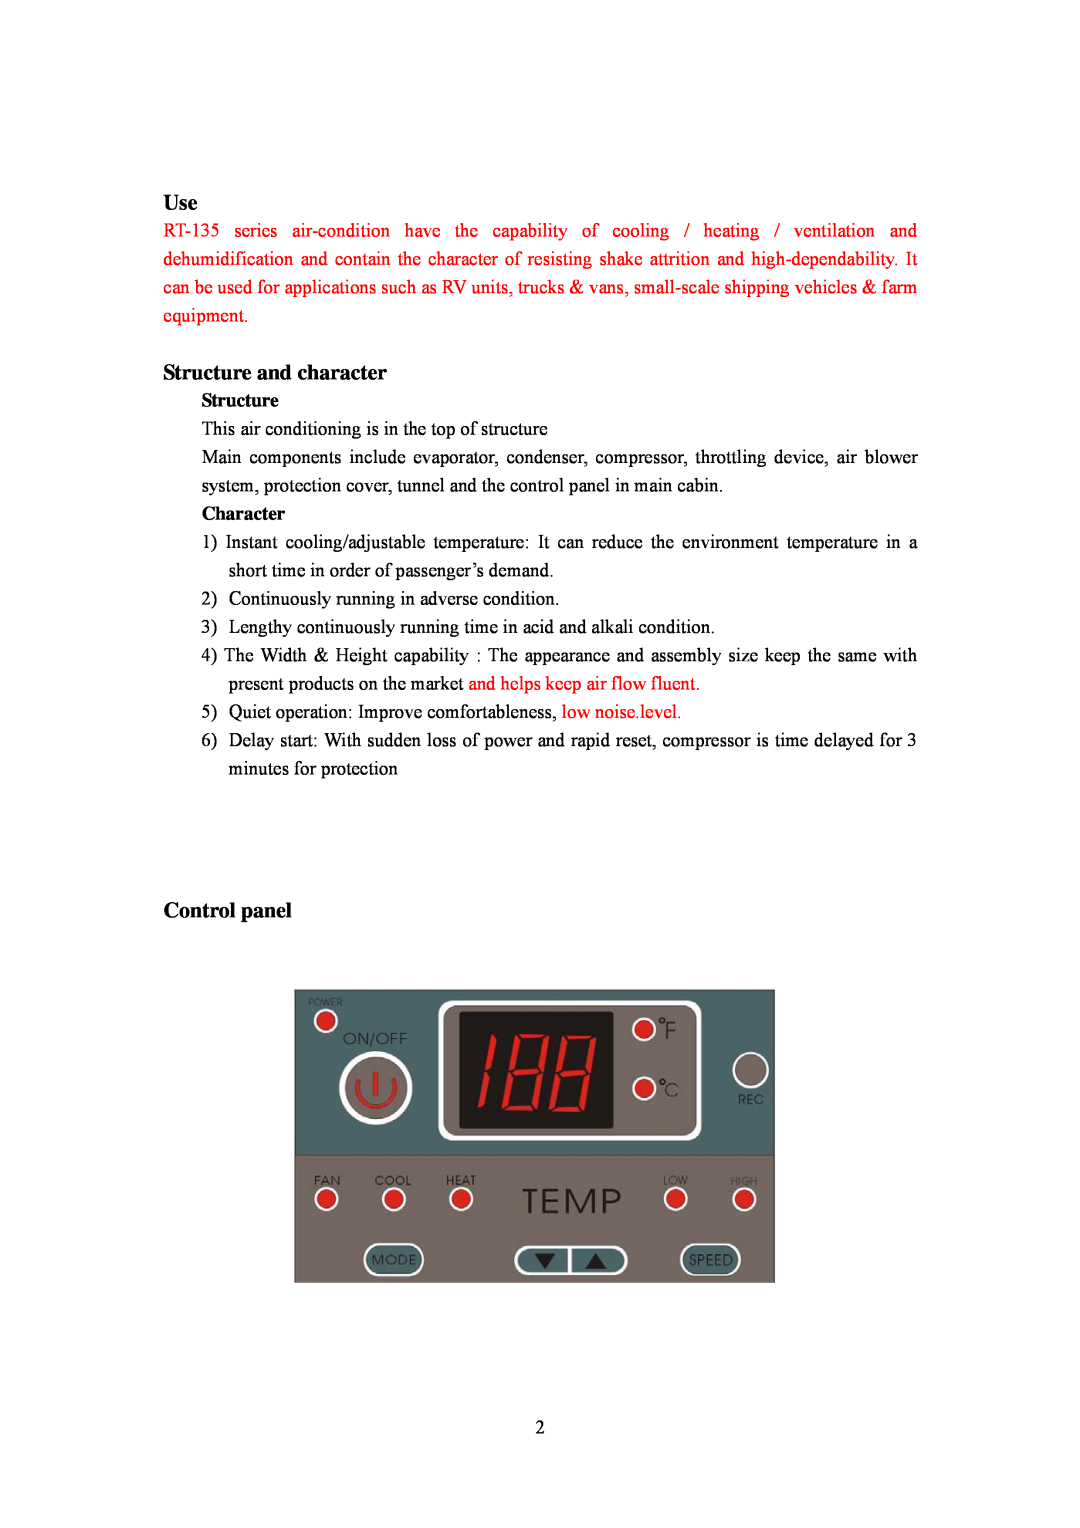 Soleus Air air-condition owner manual Structure and character, Control panel, Character 